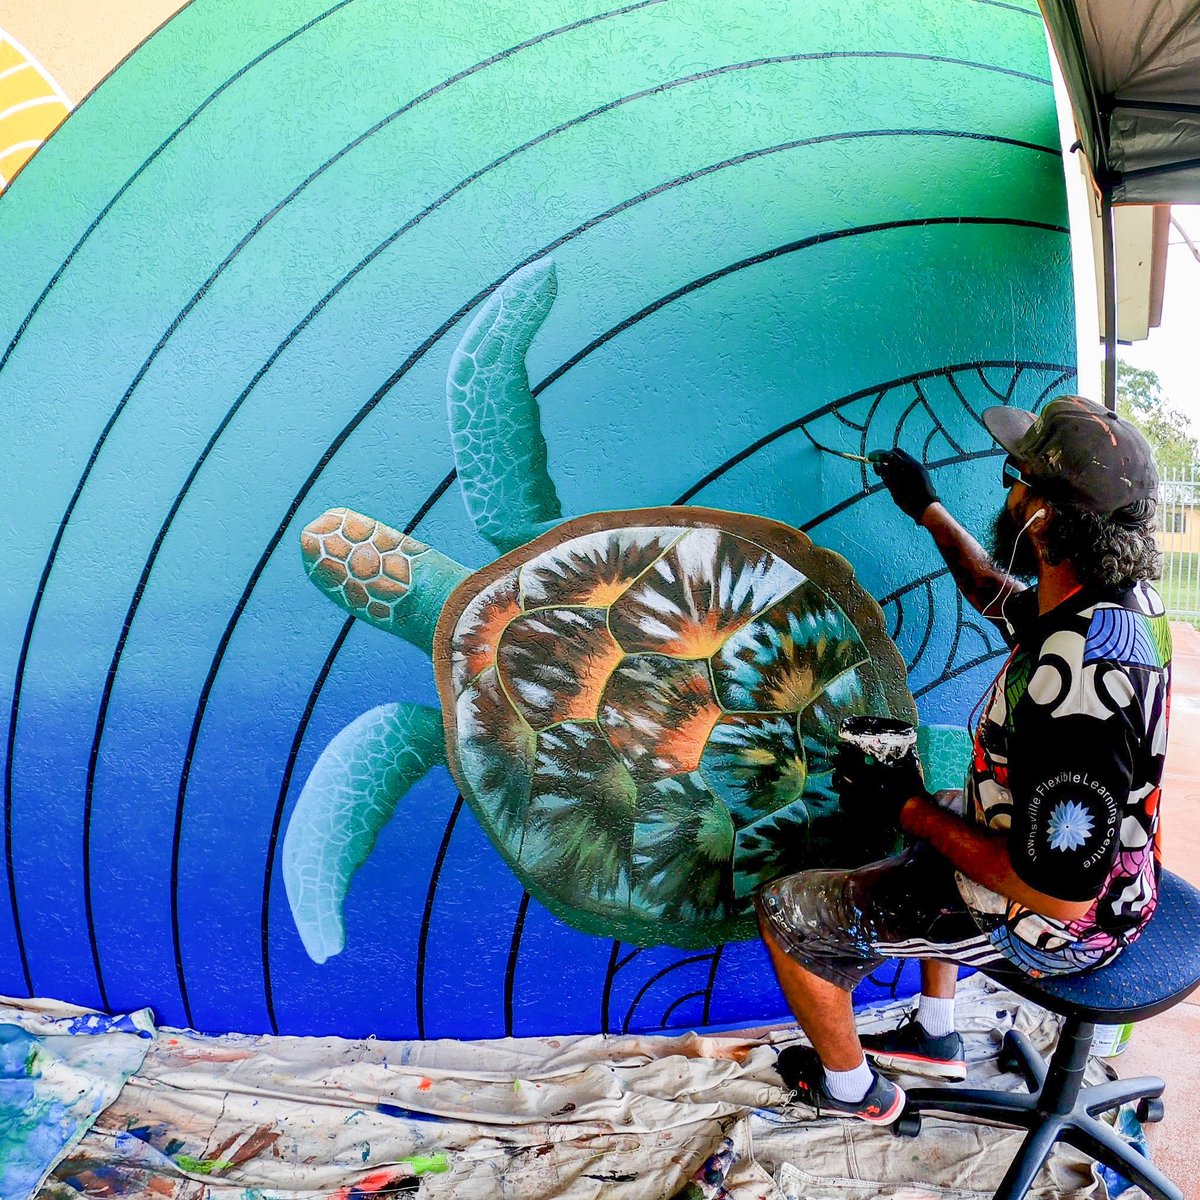 Painting at a school in Townsville. #painting #mural #StreetArt #turtle #art